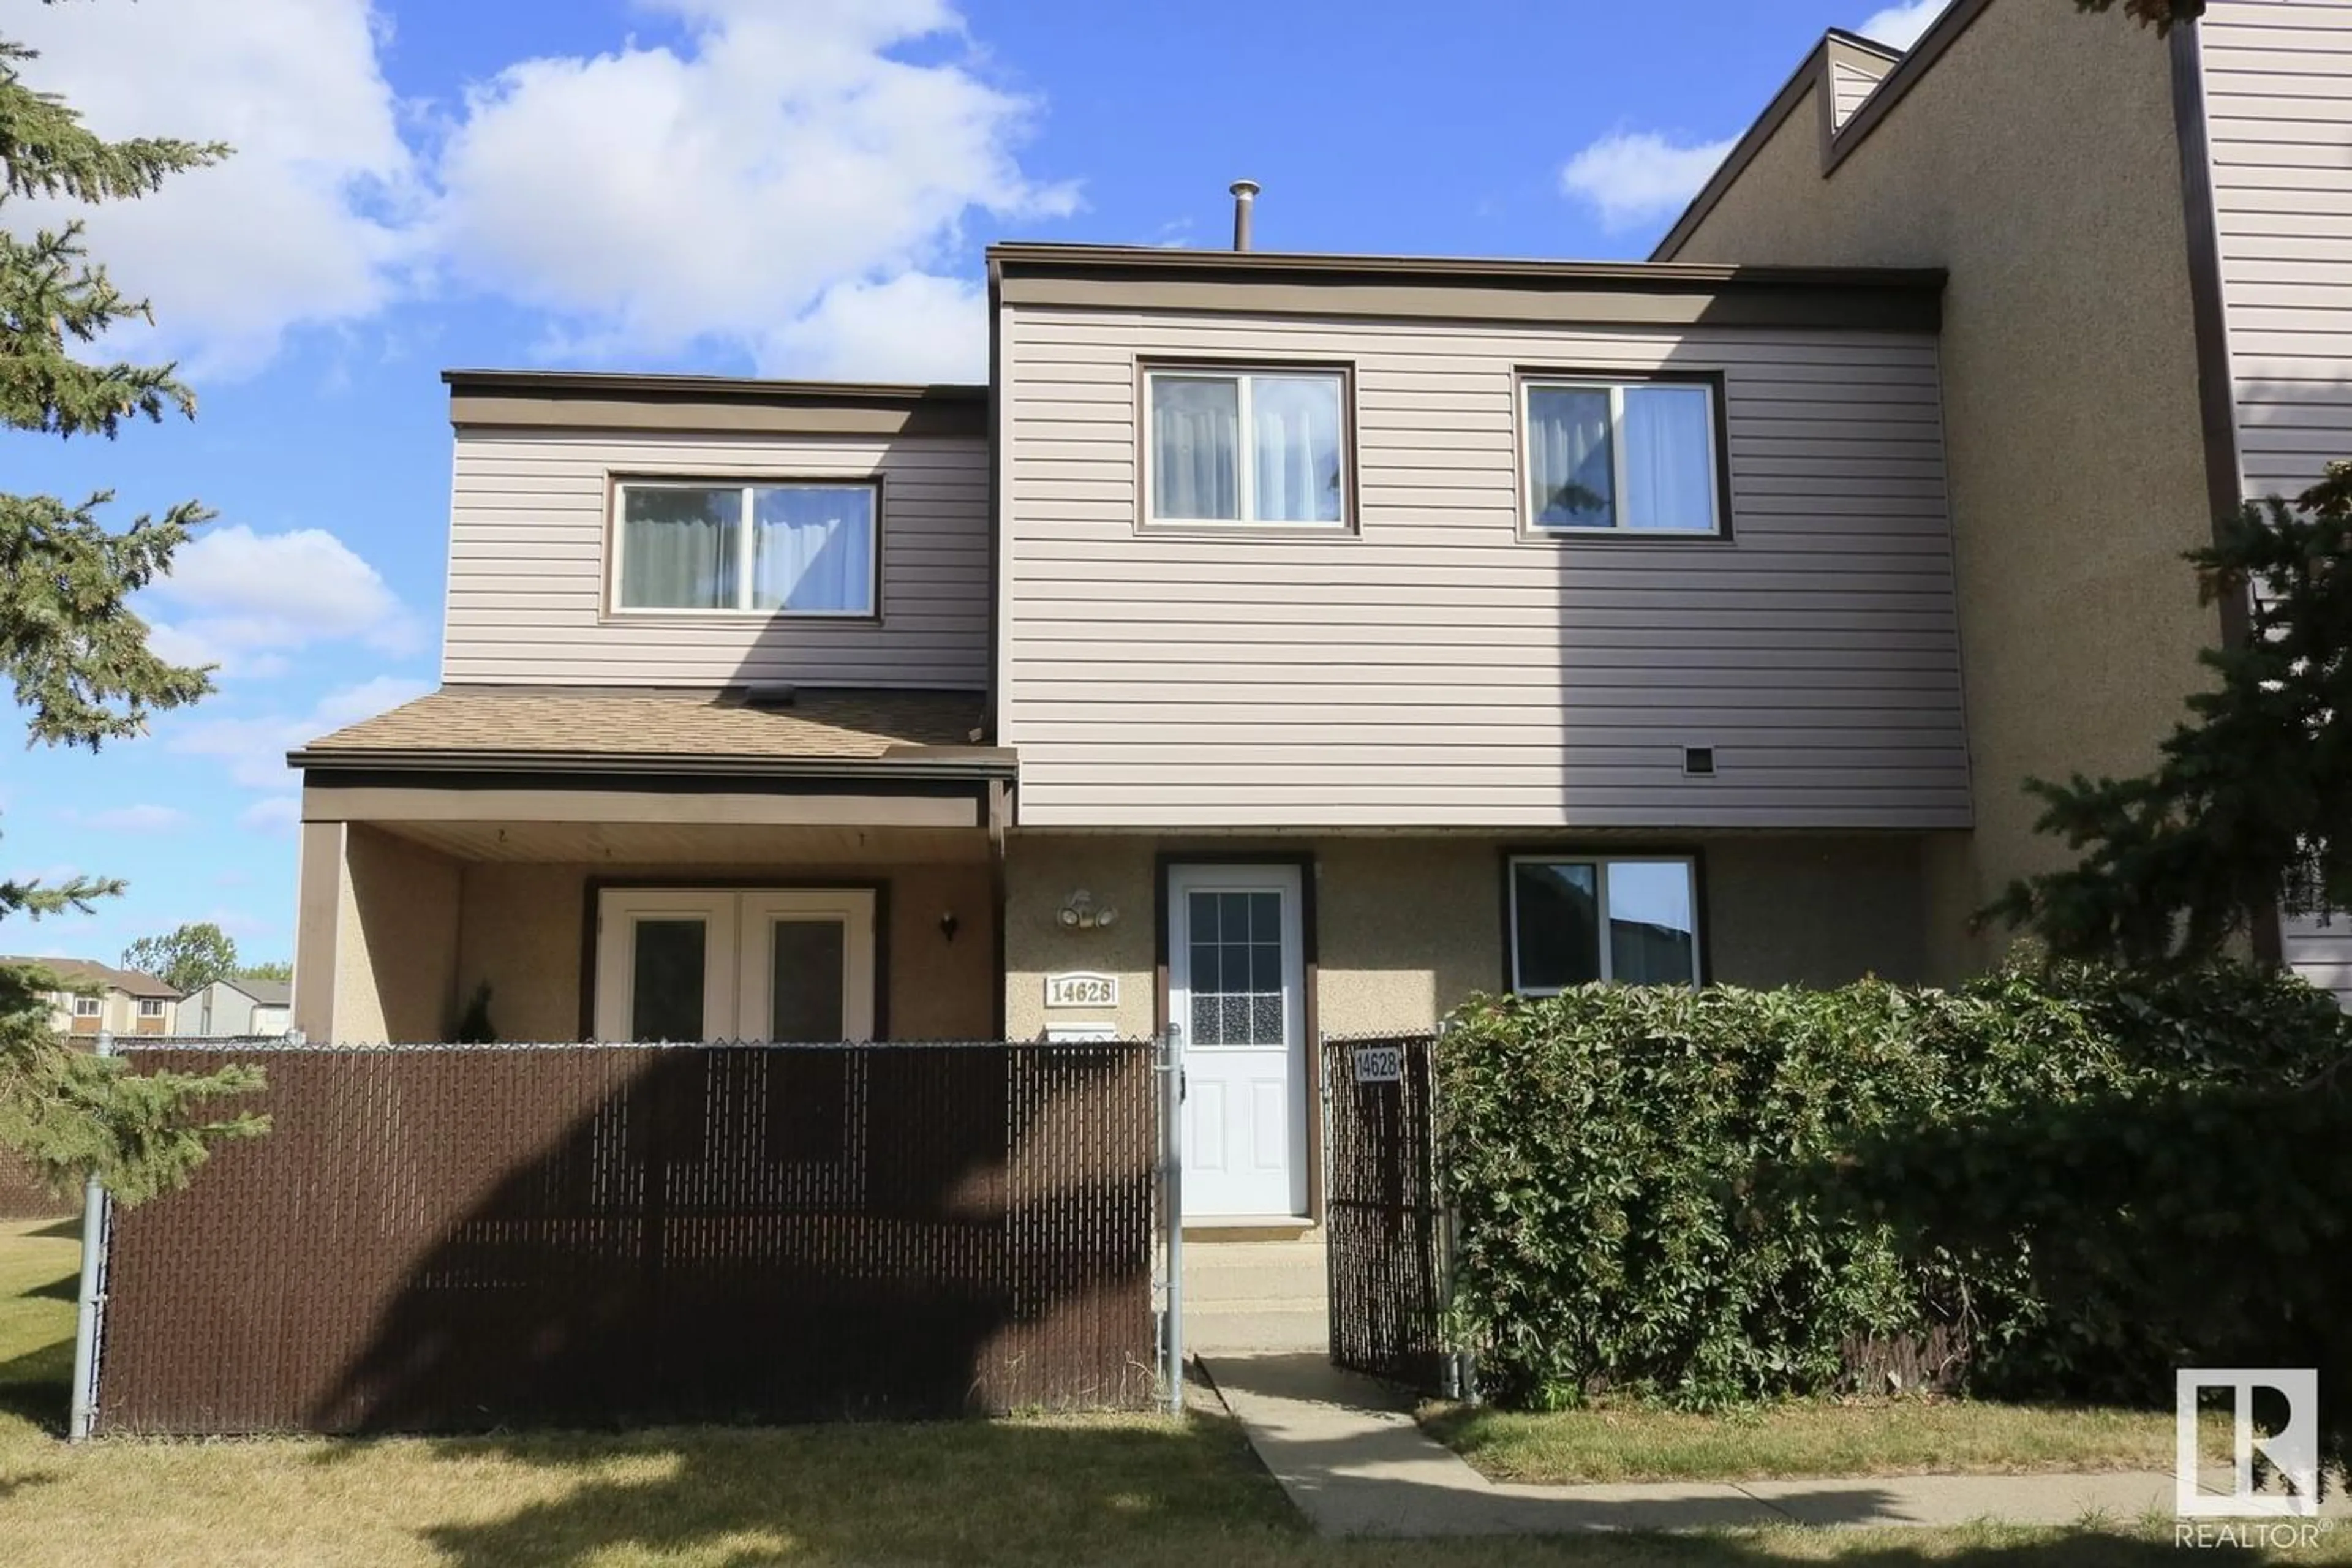 A pic from exterior of the house or condo for 14628 25 ST NW, Edmonton Alberta T5Y1X4